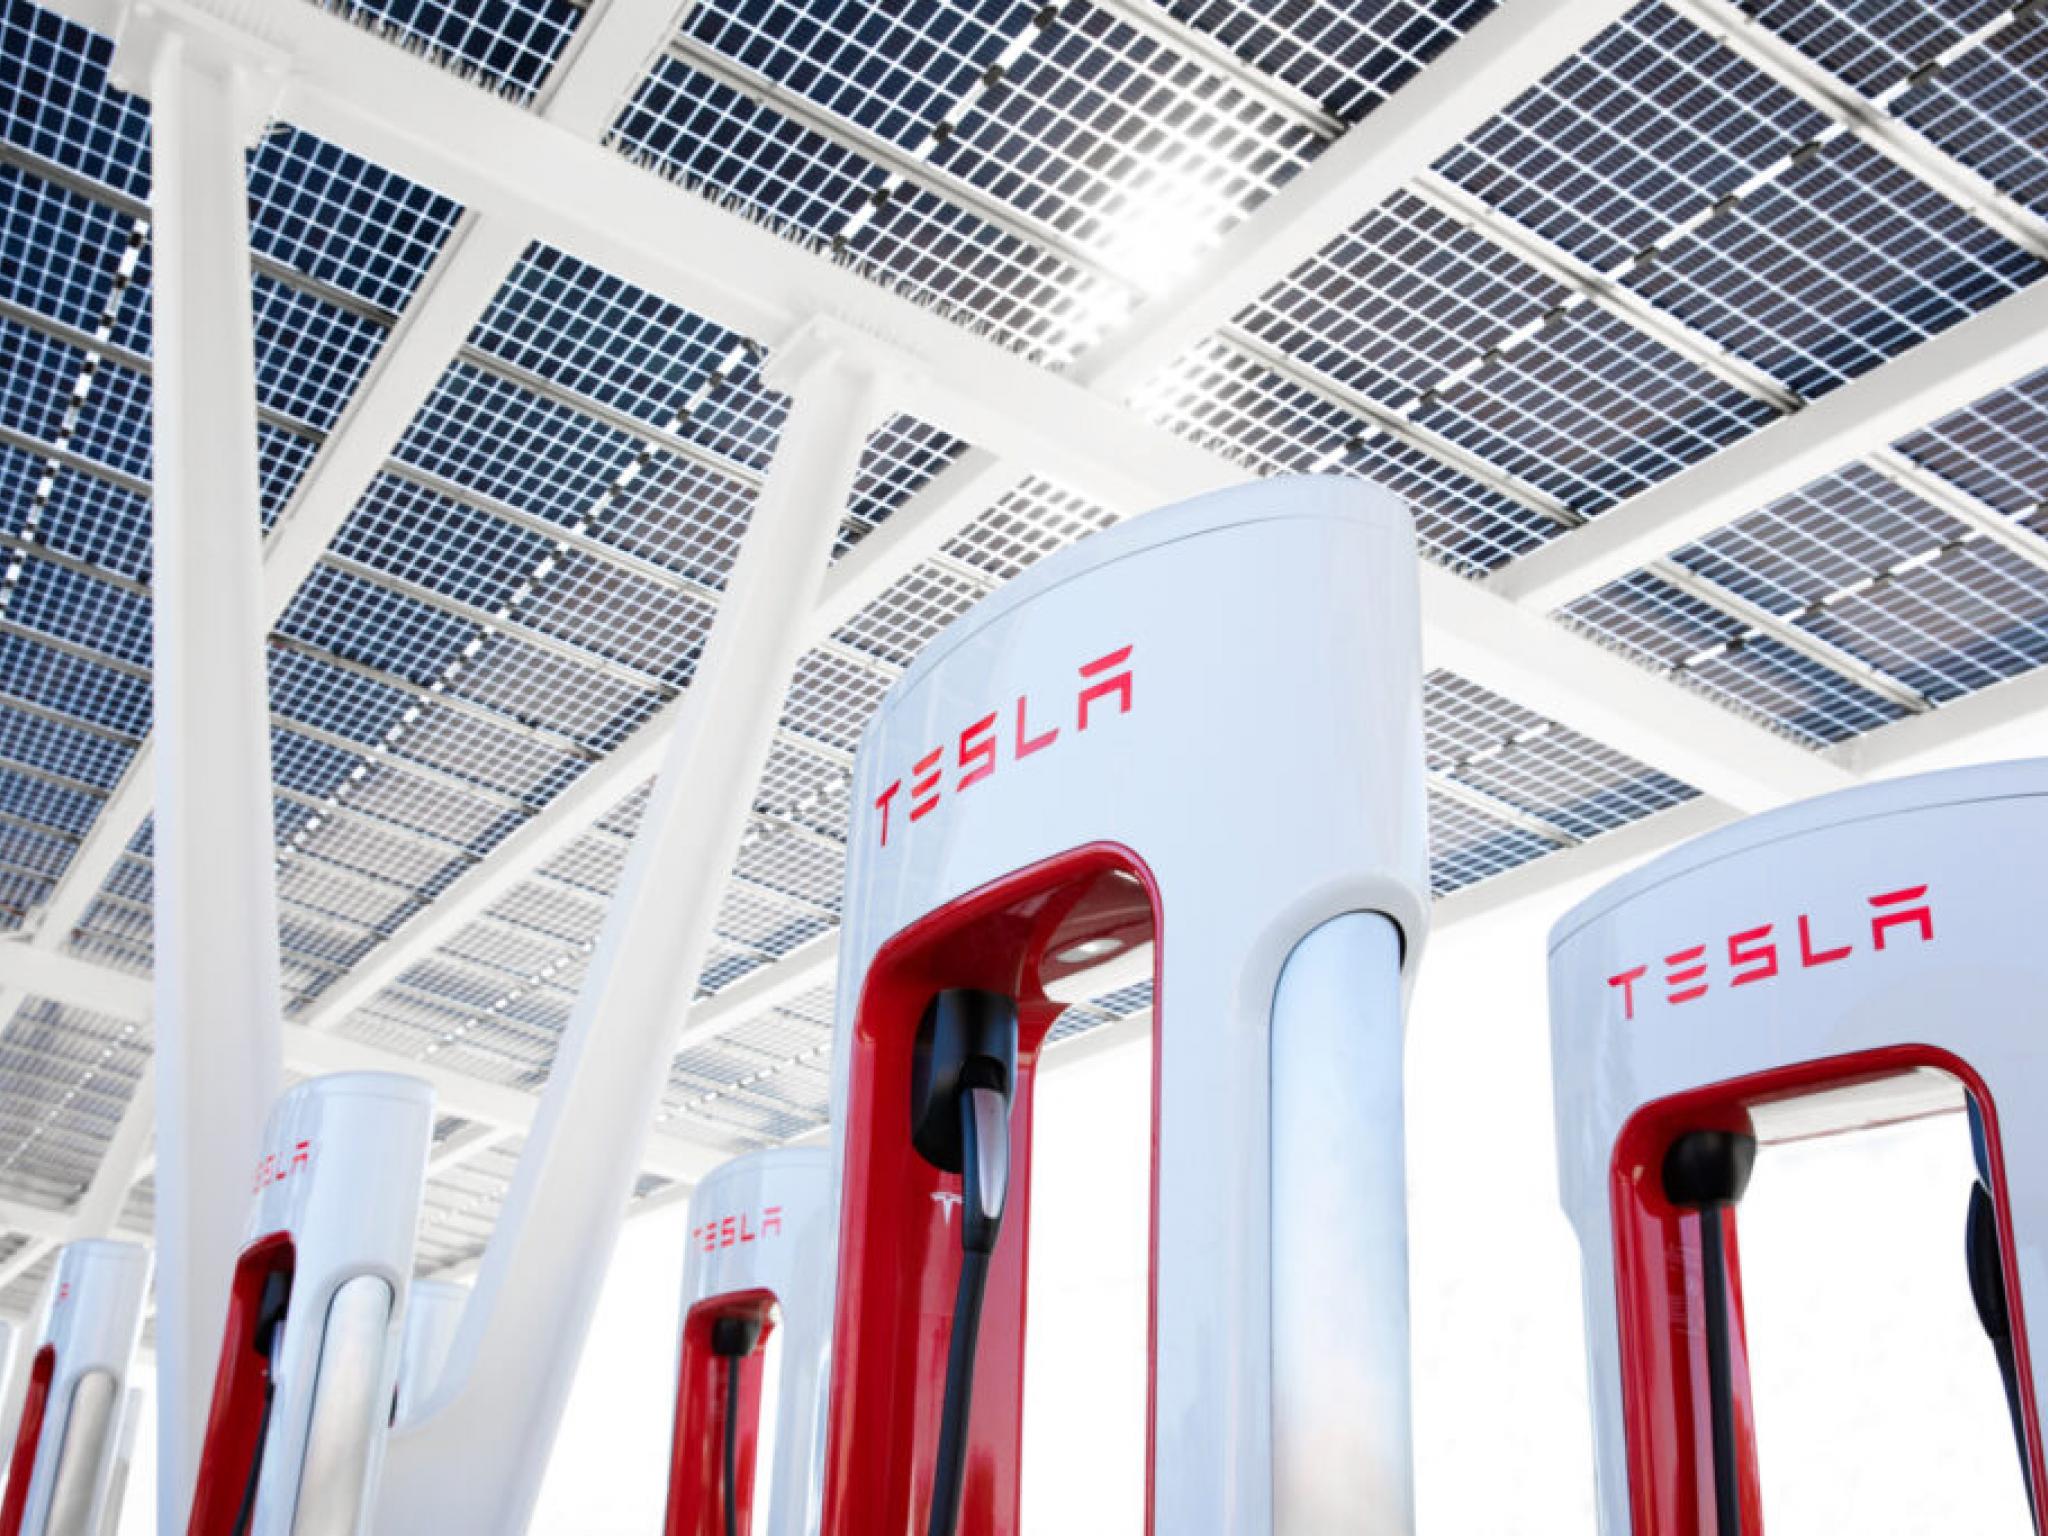  tesla-attempts-trial-to-increase-maximum-charging-rate-of-cybertrucks-on-supercharger-network 